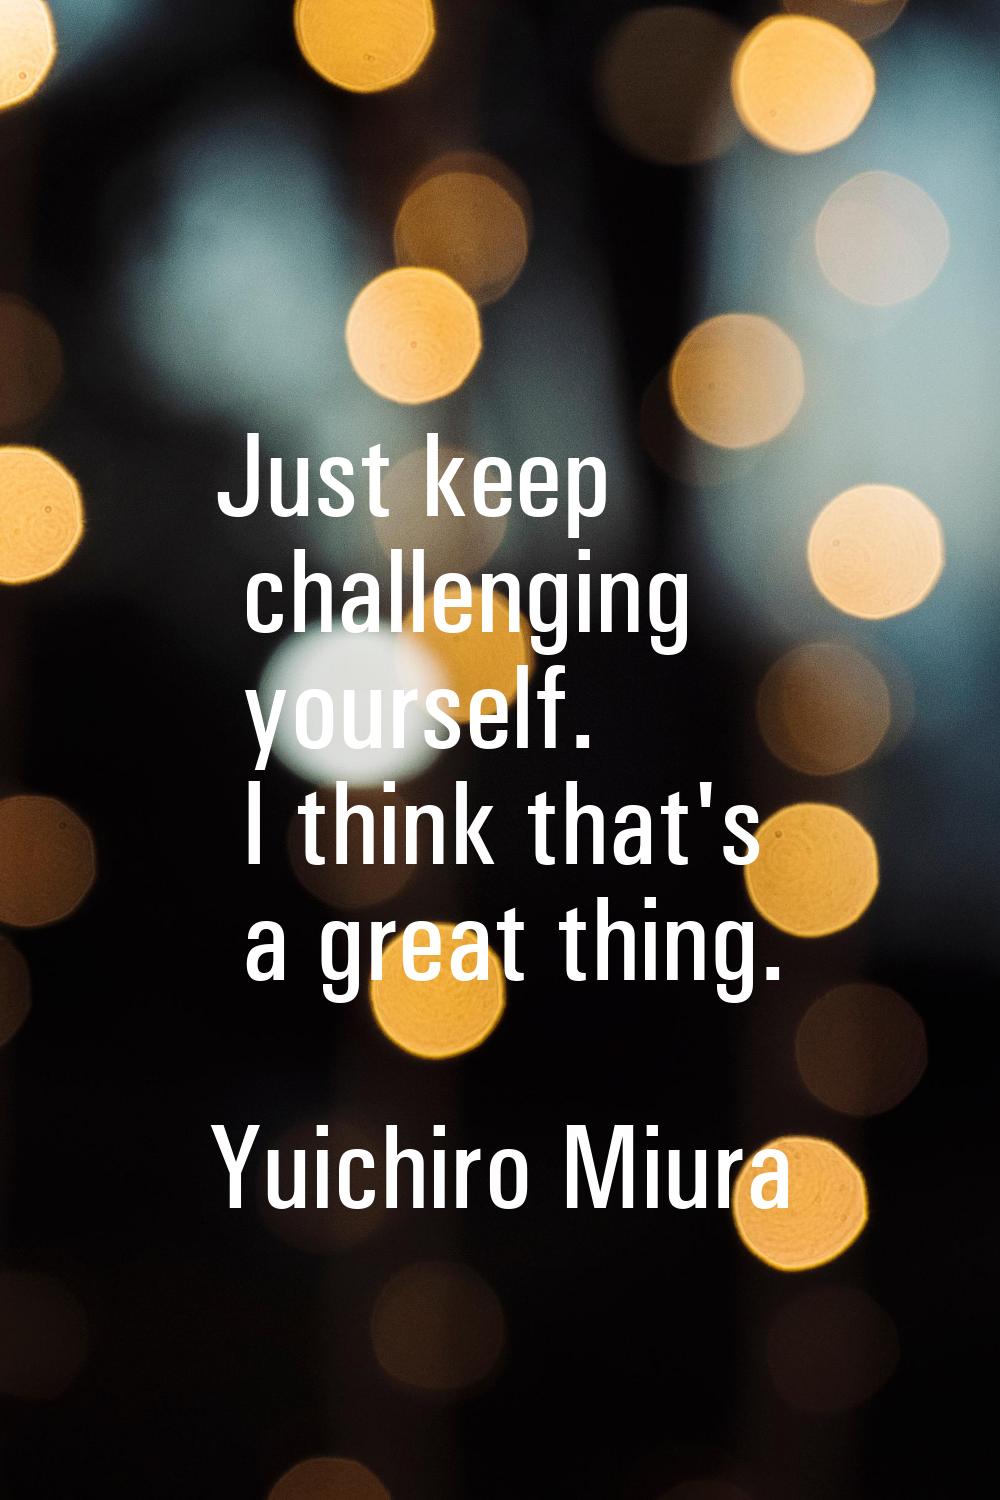 Just keep challenging yourself. I think that's a great thing.